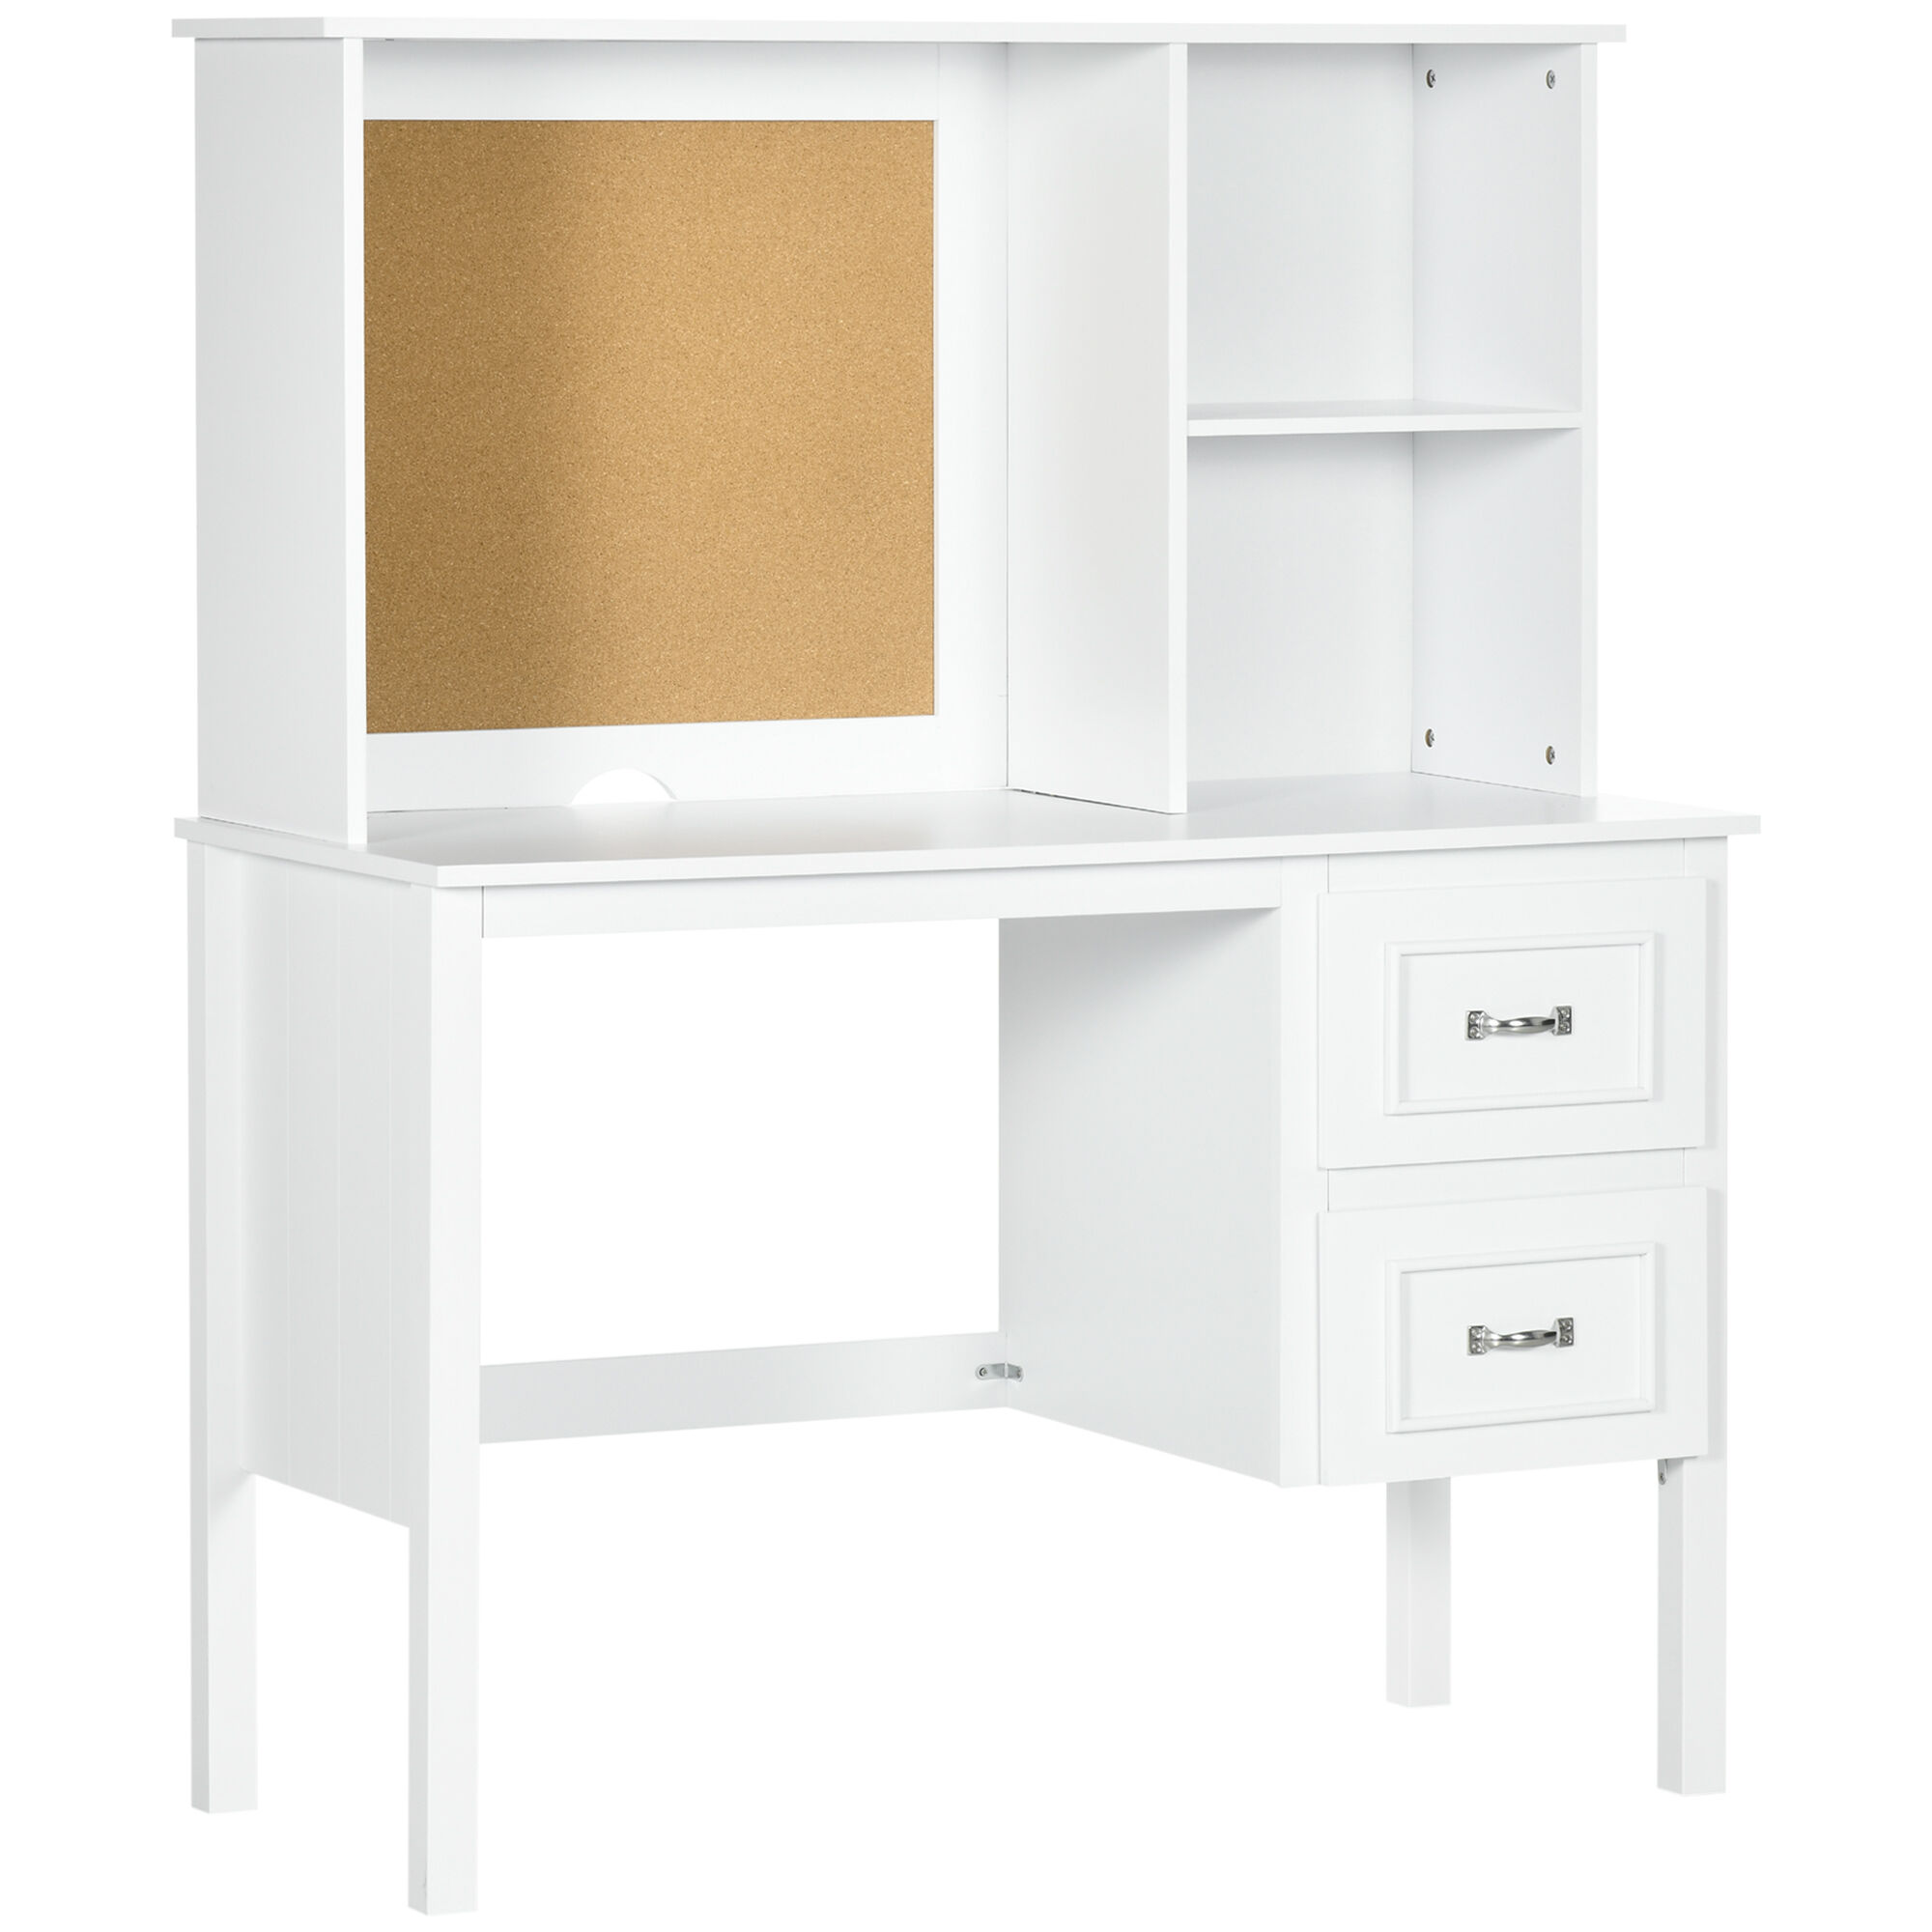 HOMCOM Computer Desk with Storage Shelves and Drawers, Home Office Workstation Table with Cork Board and Cable Hole, White